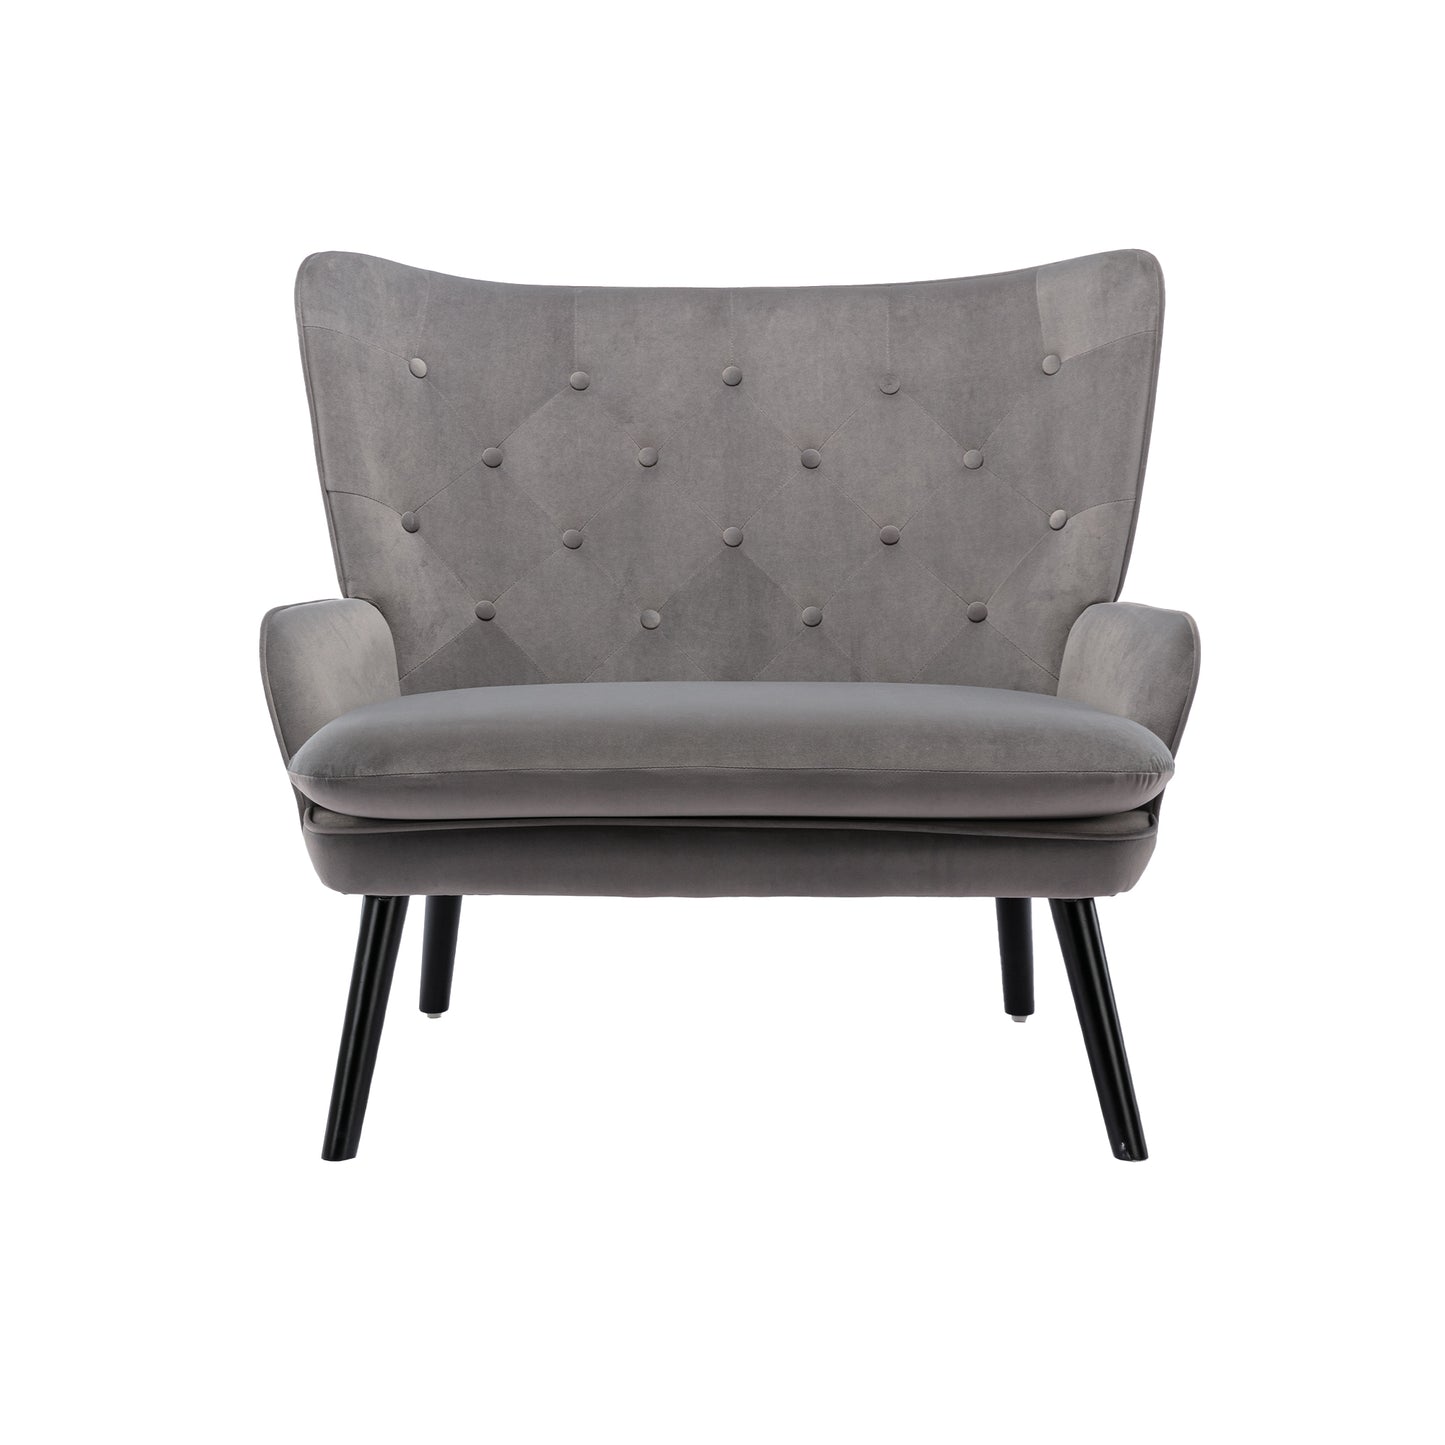 High Back Accent Chair .Comfortable Loveseat Fabric Padded Seat .Modern High Back Arm-sofa